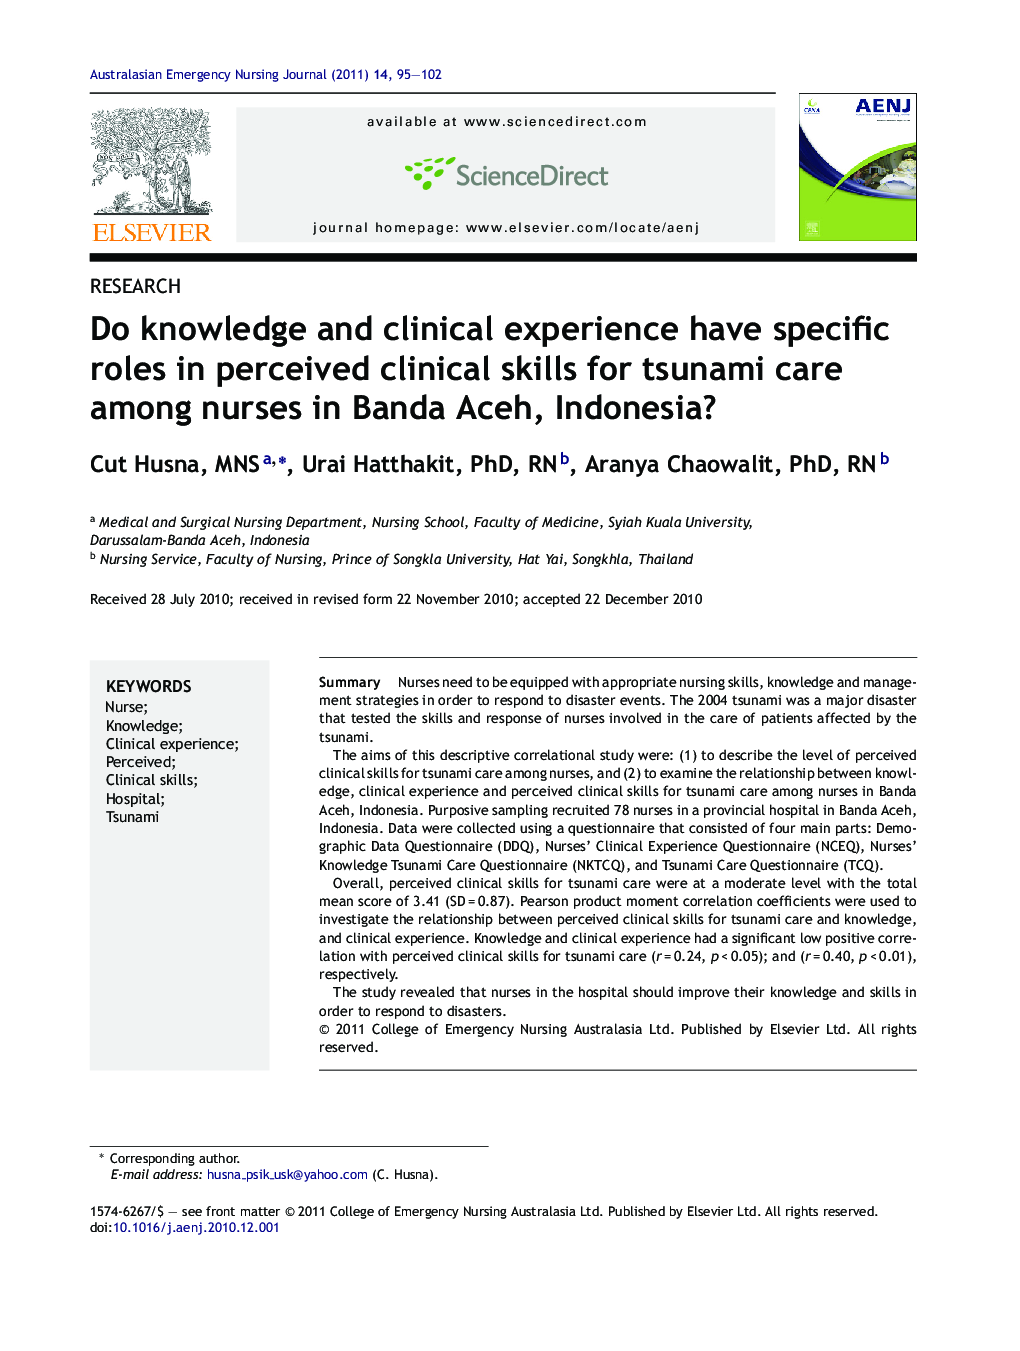 Do knowledge and clinical experience have specific roles in perceived clinical skills for tsunami care among nurses in Banda Aceh, Indonesia?